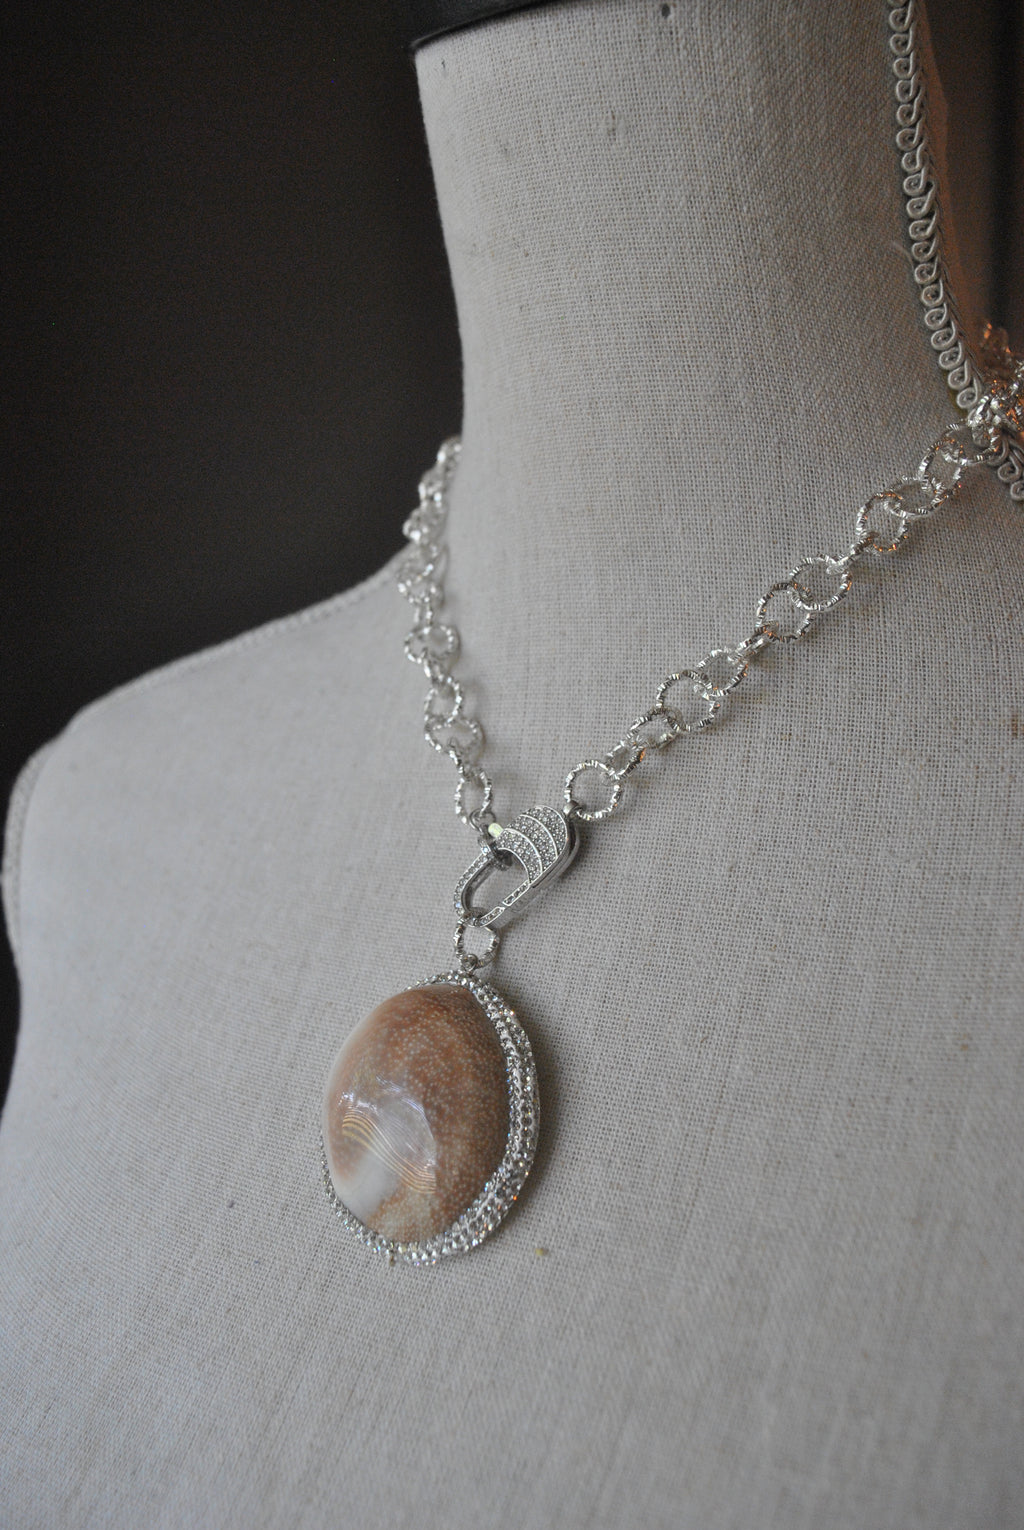 GOLDEN SHELL AND SWAROVSKI CRYSTALS NECKLACE